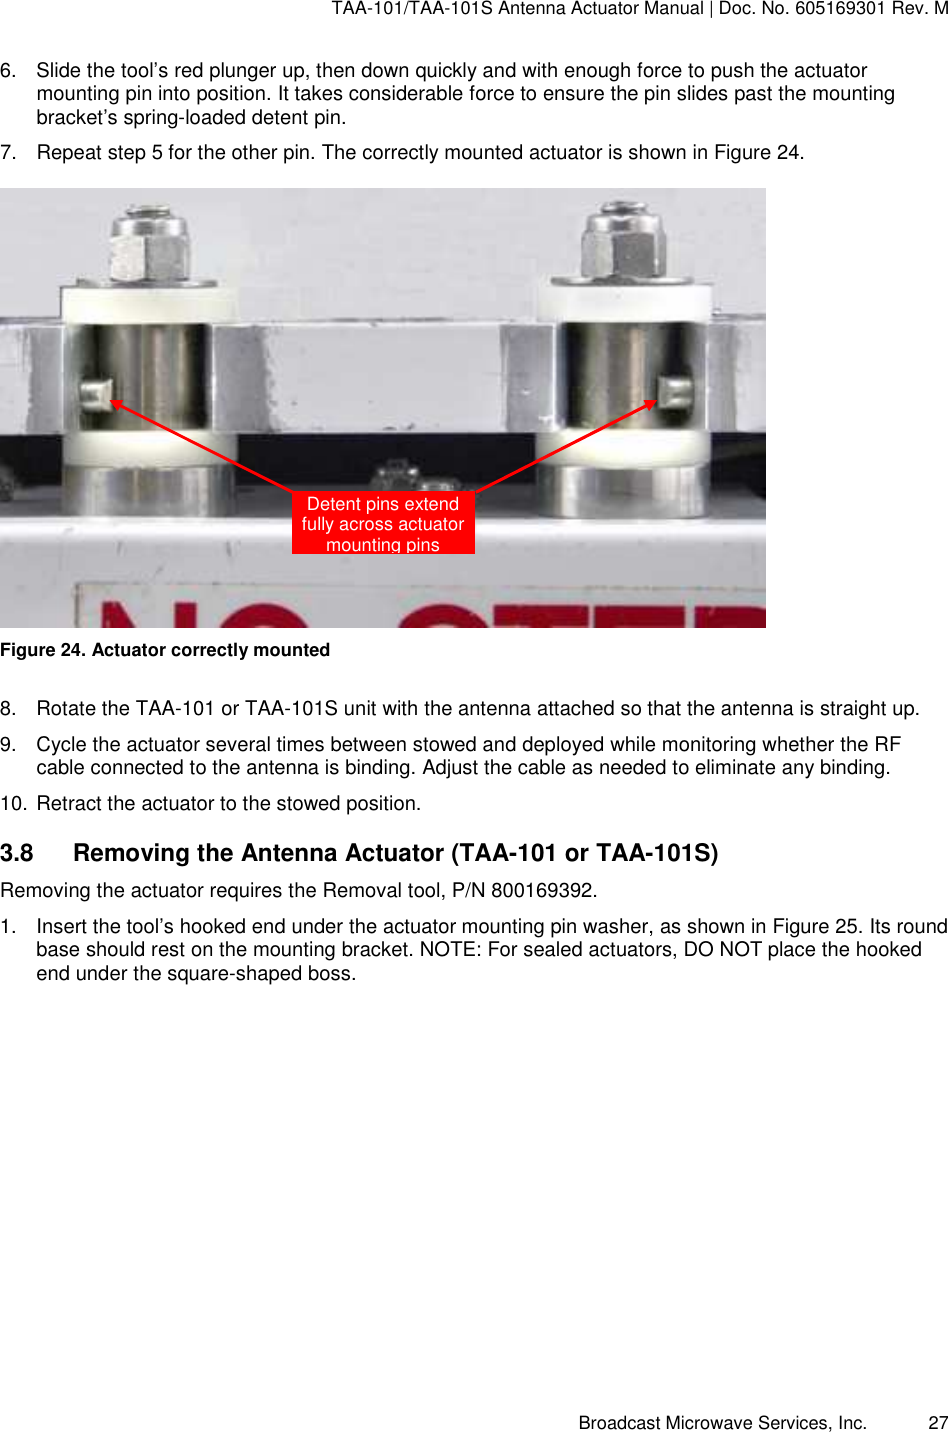 TAA-101/TAA-101S Antenna Actuator Manual | Doc. No. 605169301 Rev. M Broadcast Microwave Services, Inc.      27 6.  Slide the tool’s red plunger up, then down quickly and with enough force to push the actuator mounting pin into position. It takes considerable force to ensure the pin slides past the mounting bracket’s spring-loaded detent pin.  7.  Repeat step 5 for the other pin. The correctly mounted actuator is shown in Figure 24.   Figure 24. Actuator correctly mounted 8.  Rotate the TAA-101 or TAA-101S unit with the antenna attached so that the antenna is straight up.  9.  Cycle the actuator several times between stowed and deployed while monitoring whether the RF cable connected to the antenna is binding. Adjust the cable as needed to eliminate any binding. 10. Retract the actuator to the stowed position. 3.8  Removing the Antenna Actuator (TAA-101 or TAA-101S) Removing the actuator requires the Removal tool, P/N 800169392.  1.  Insert the tool’s hooked end under the actuator mounting pin washer, as shown in Figure 25. Its round base should rest on the mounting bracket. NOTE: For sealed actuators, DO NOT place the hooked end under the square-shaped boss. Detent pins extend fully across actuator mounting pins 